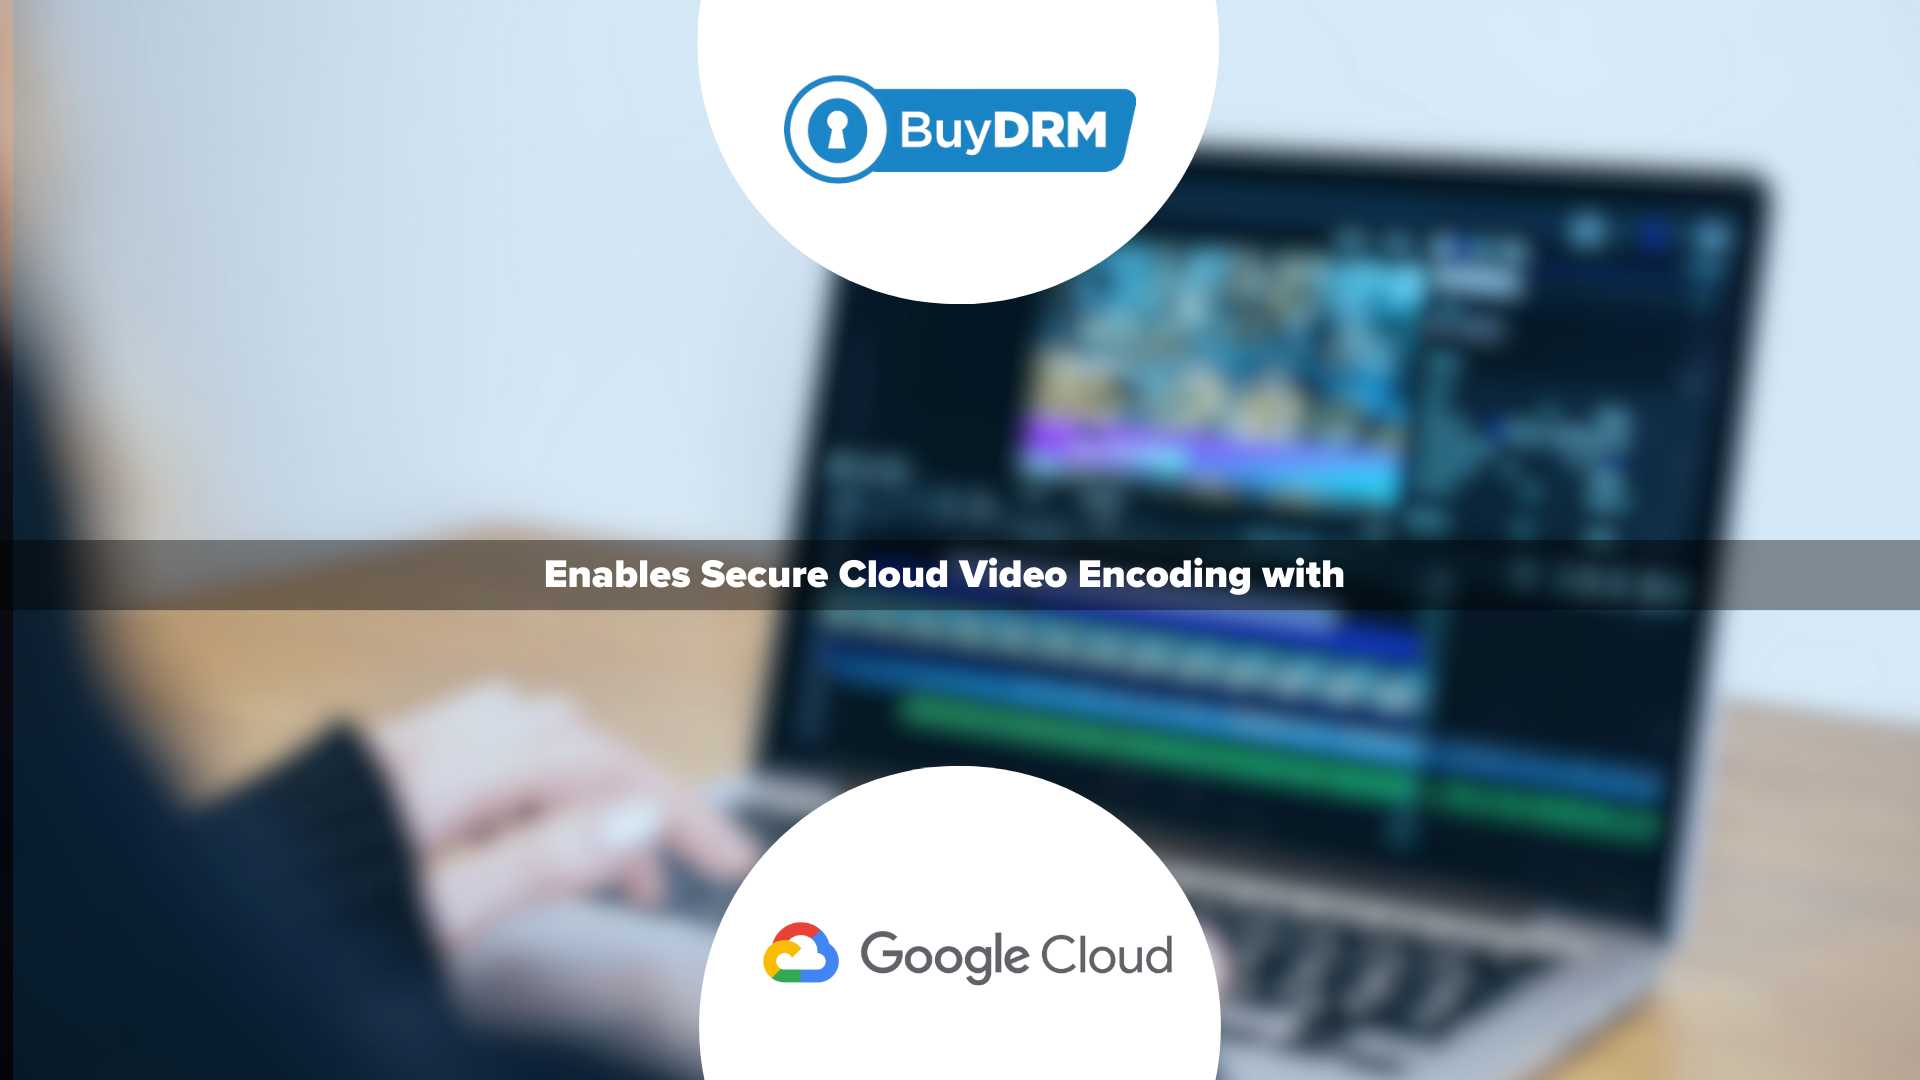 BuyDRM Enables Secure Cloud Video Encoding with Google Cloud